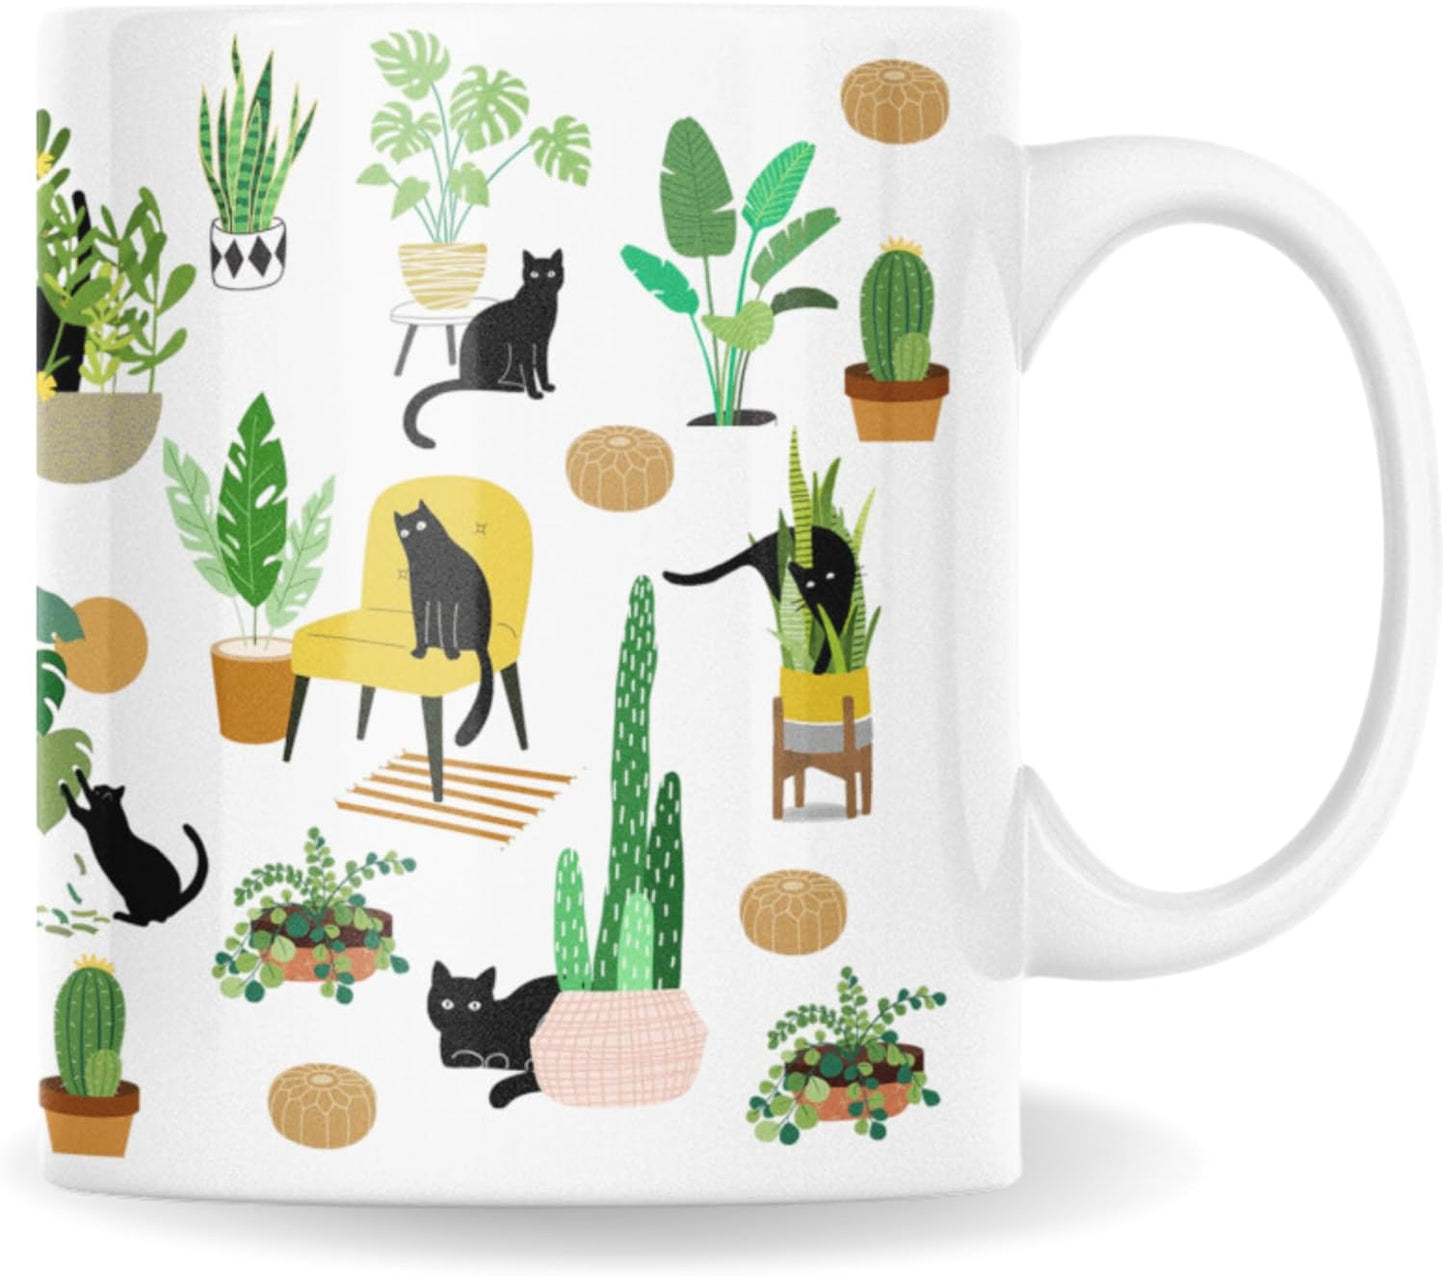 Vivulla68 Cat And Plant Mug, Gardening Gifts For Women, Cat Christmas Gifts For Women, Cat Cup, Cat Coffee Mugs For Cat Lovers, Plant Lover Gifts For Women, Cat Themed Gifts For Women, Plant Mom Gifts